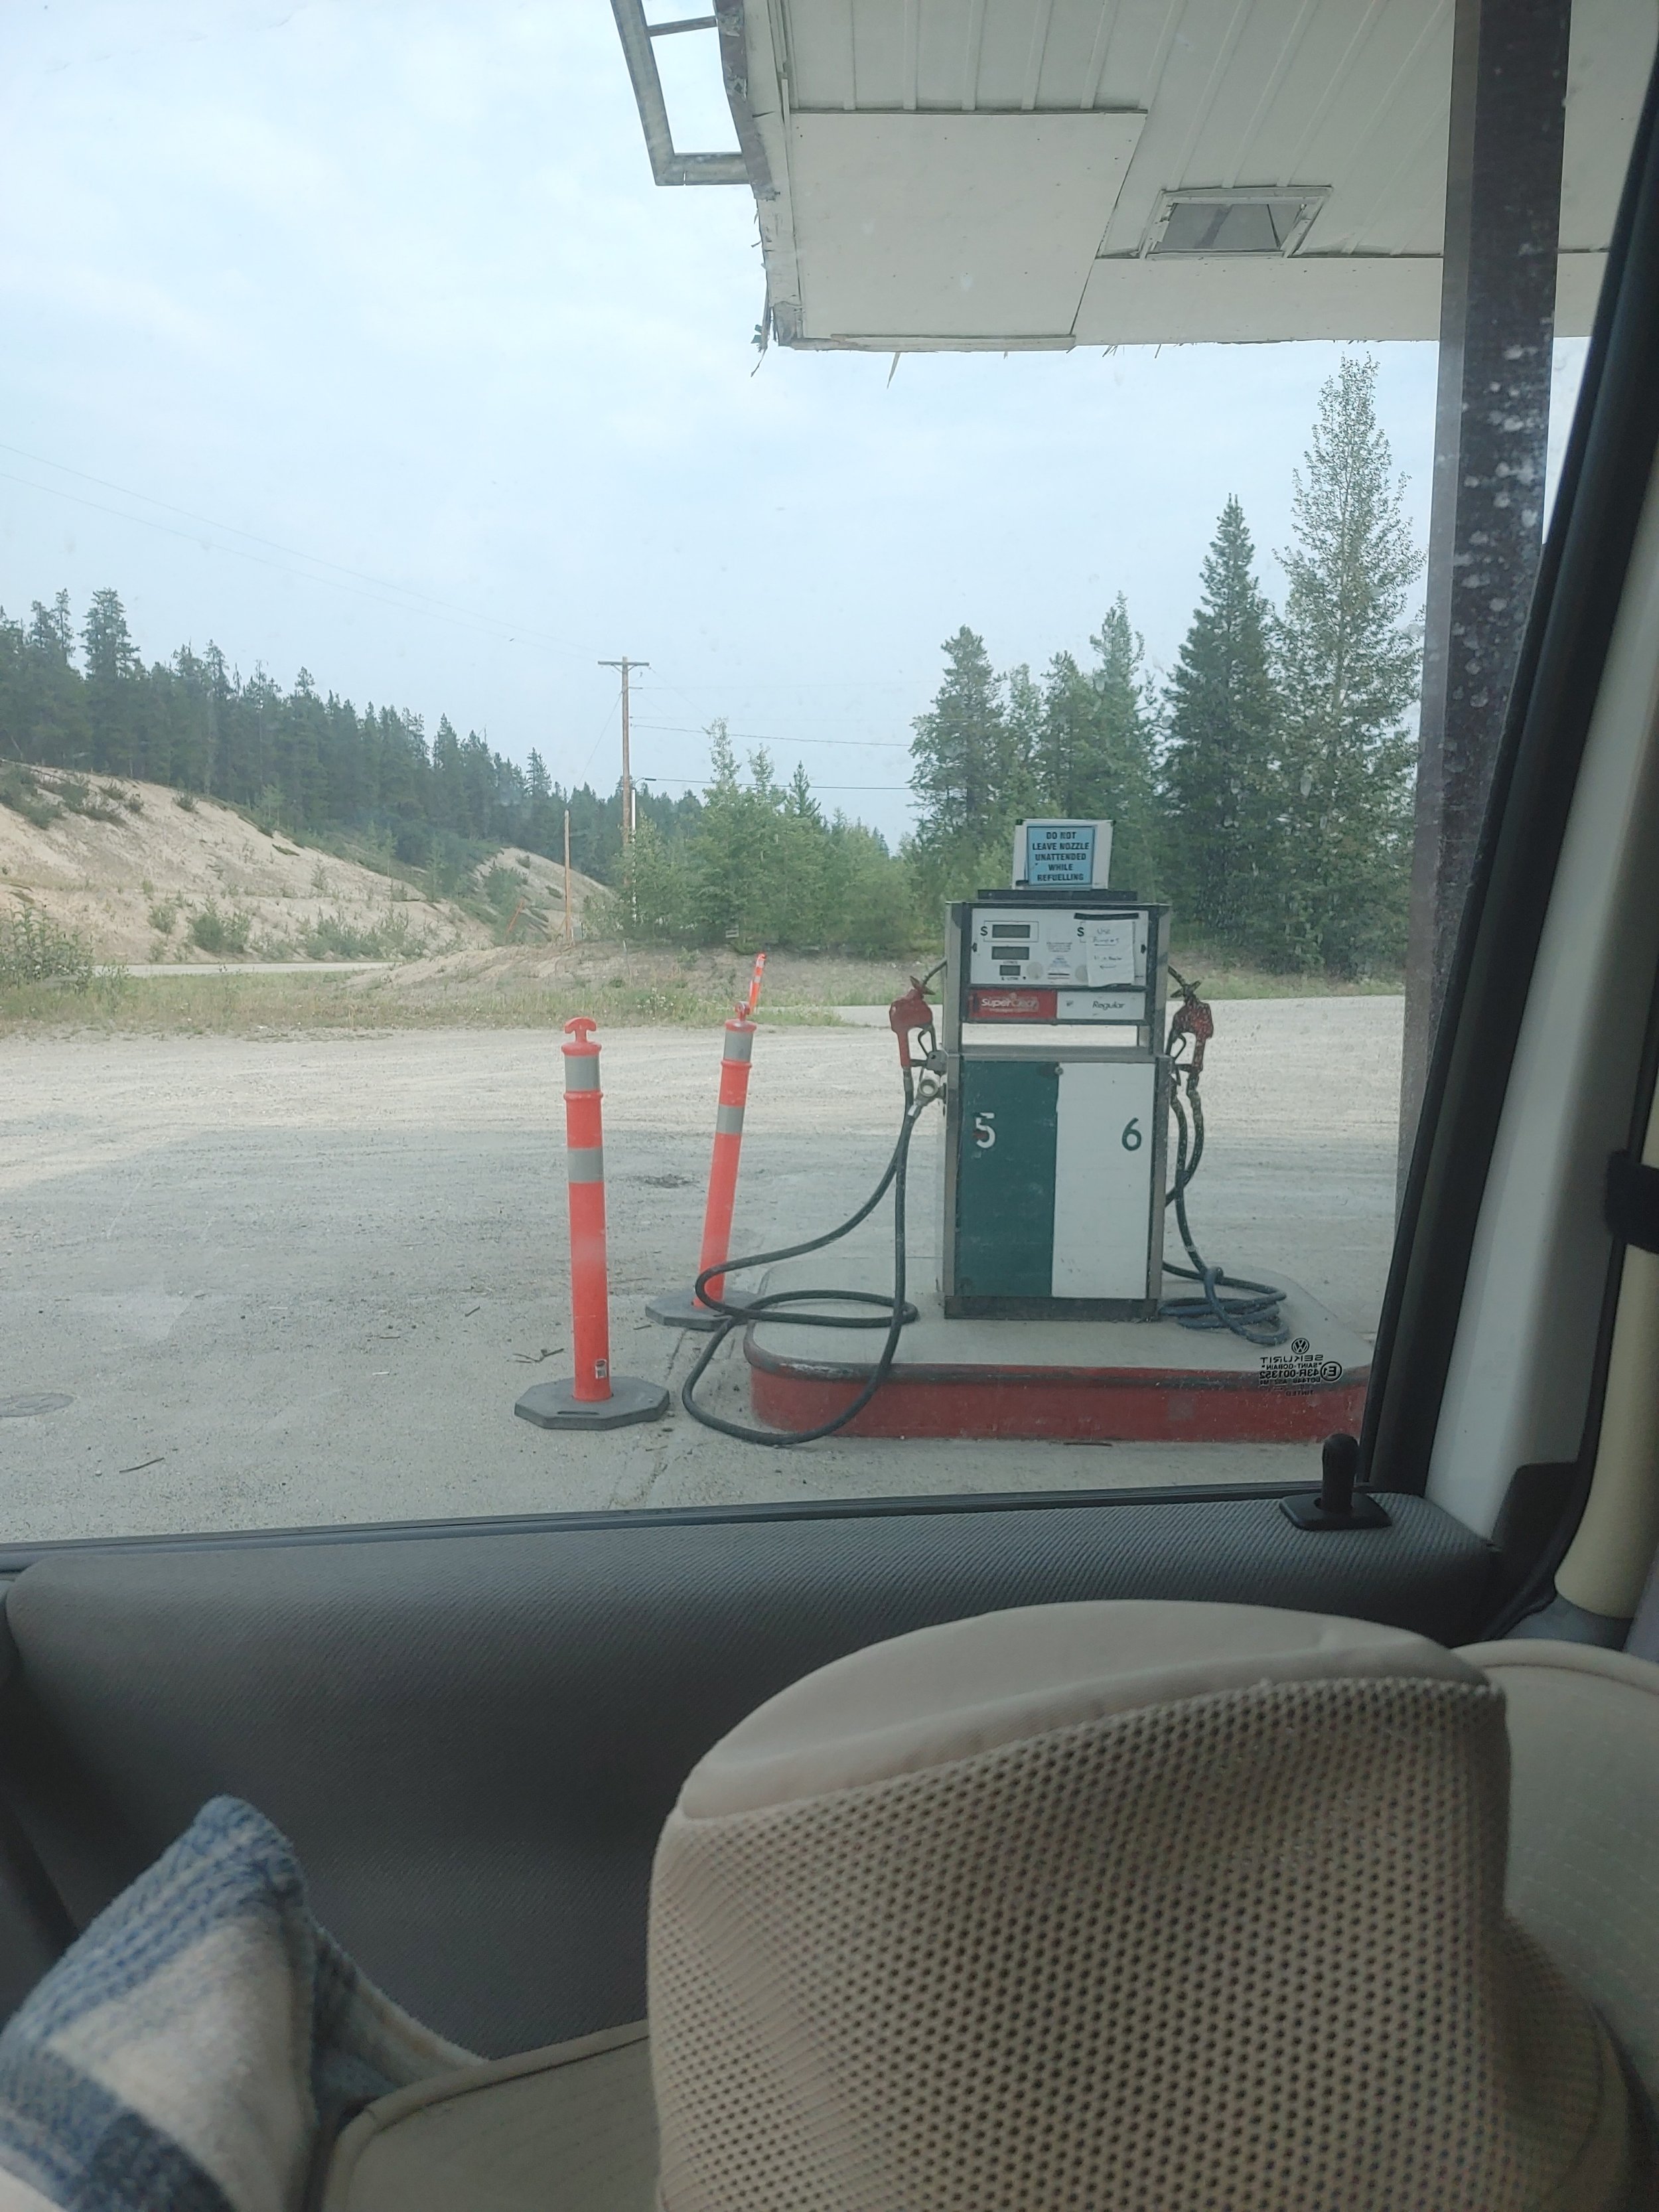  Gas pump, northern territories style 